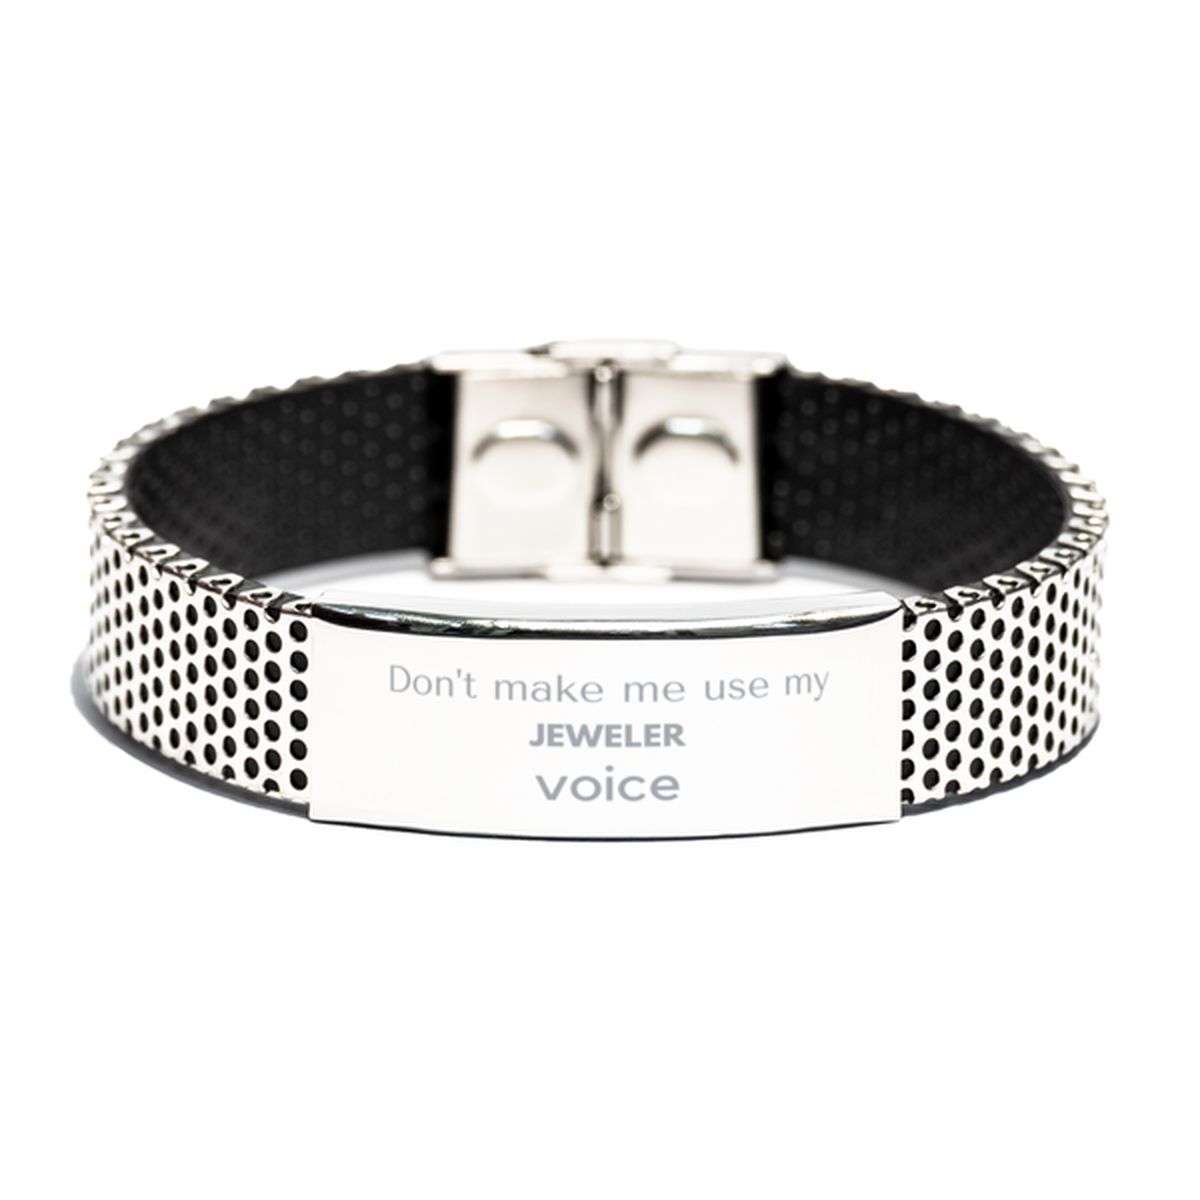 Don't make me use my Jeweler voice, Sarcasm Jeweler Gifts, Christmas Jeweler Stainless Steel Bracelet Birthday Unique Gifts For Jeweler Coworkers, Men, Women, Colleague, Friends